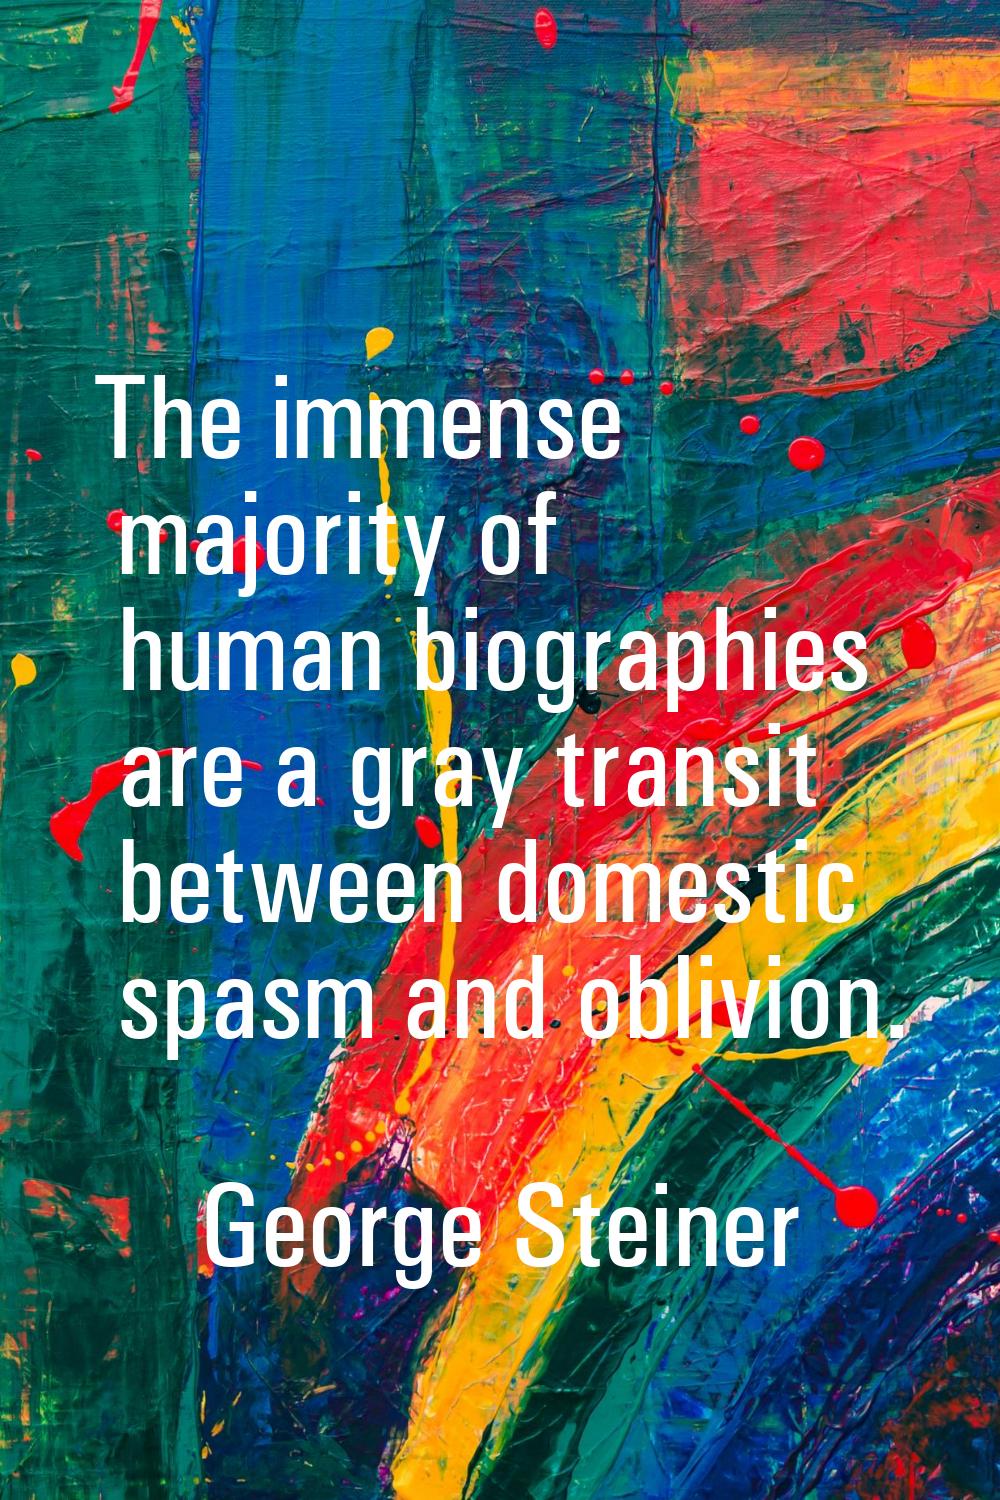 The immense majority of human biographies are a gray transit between domestic spasm and oblivion.